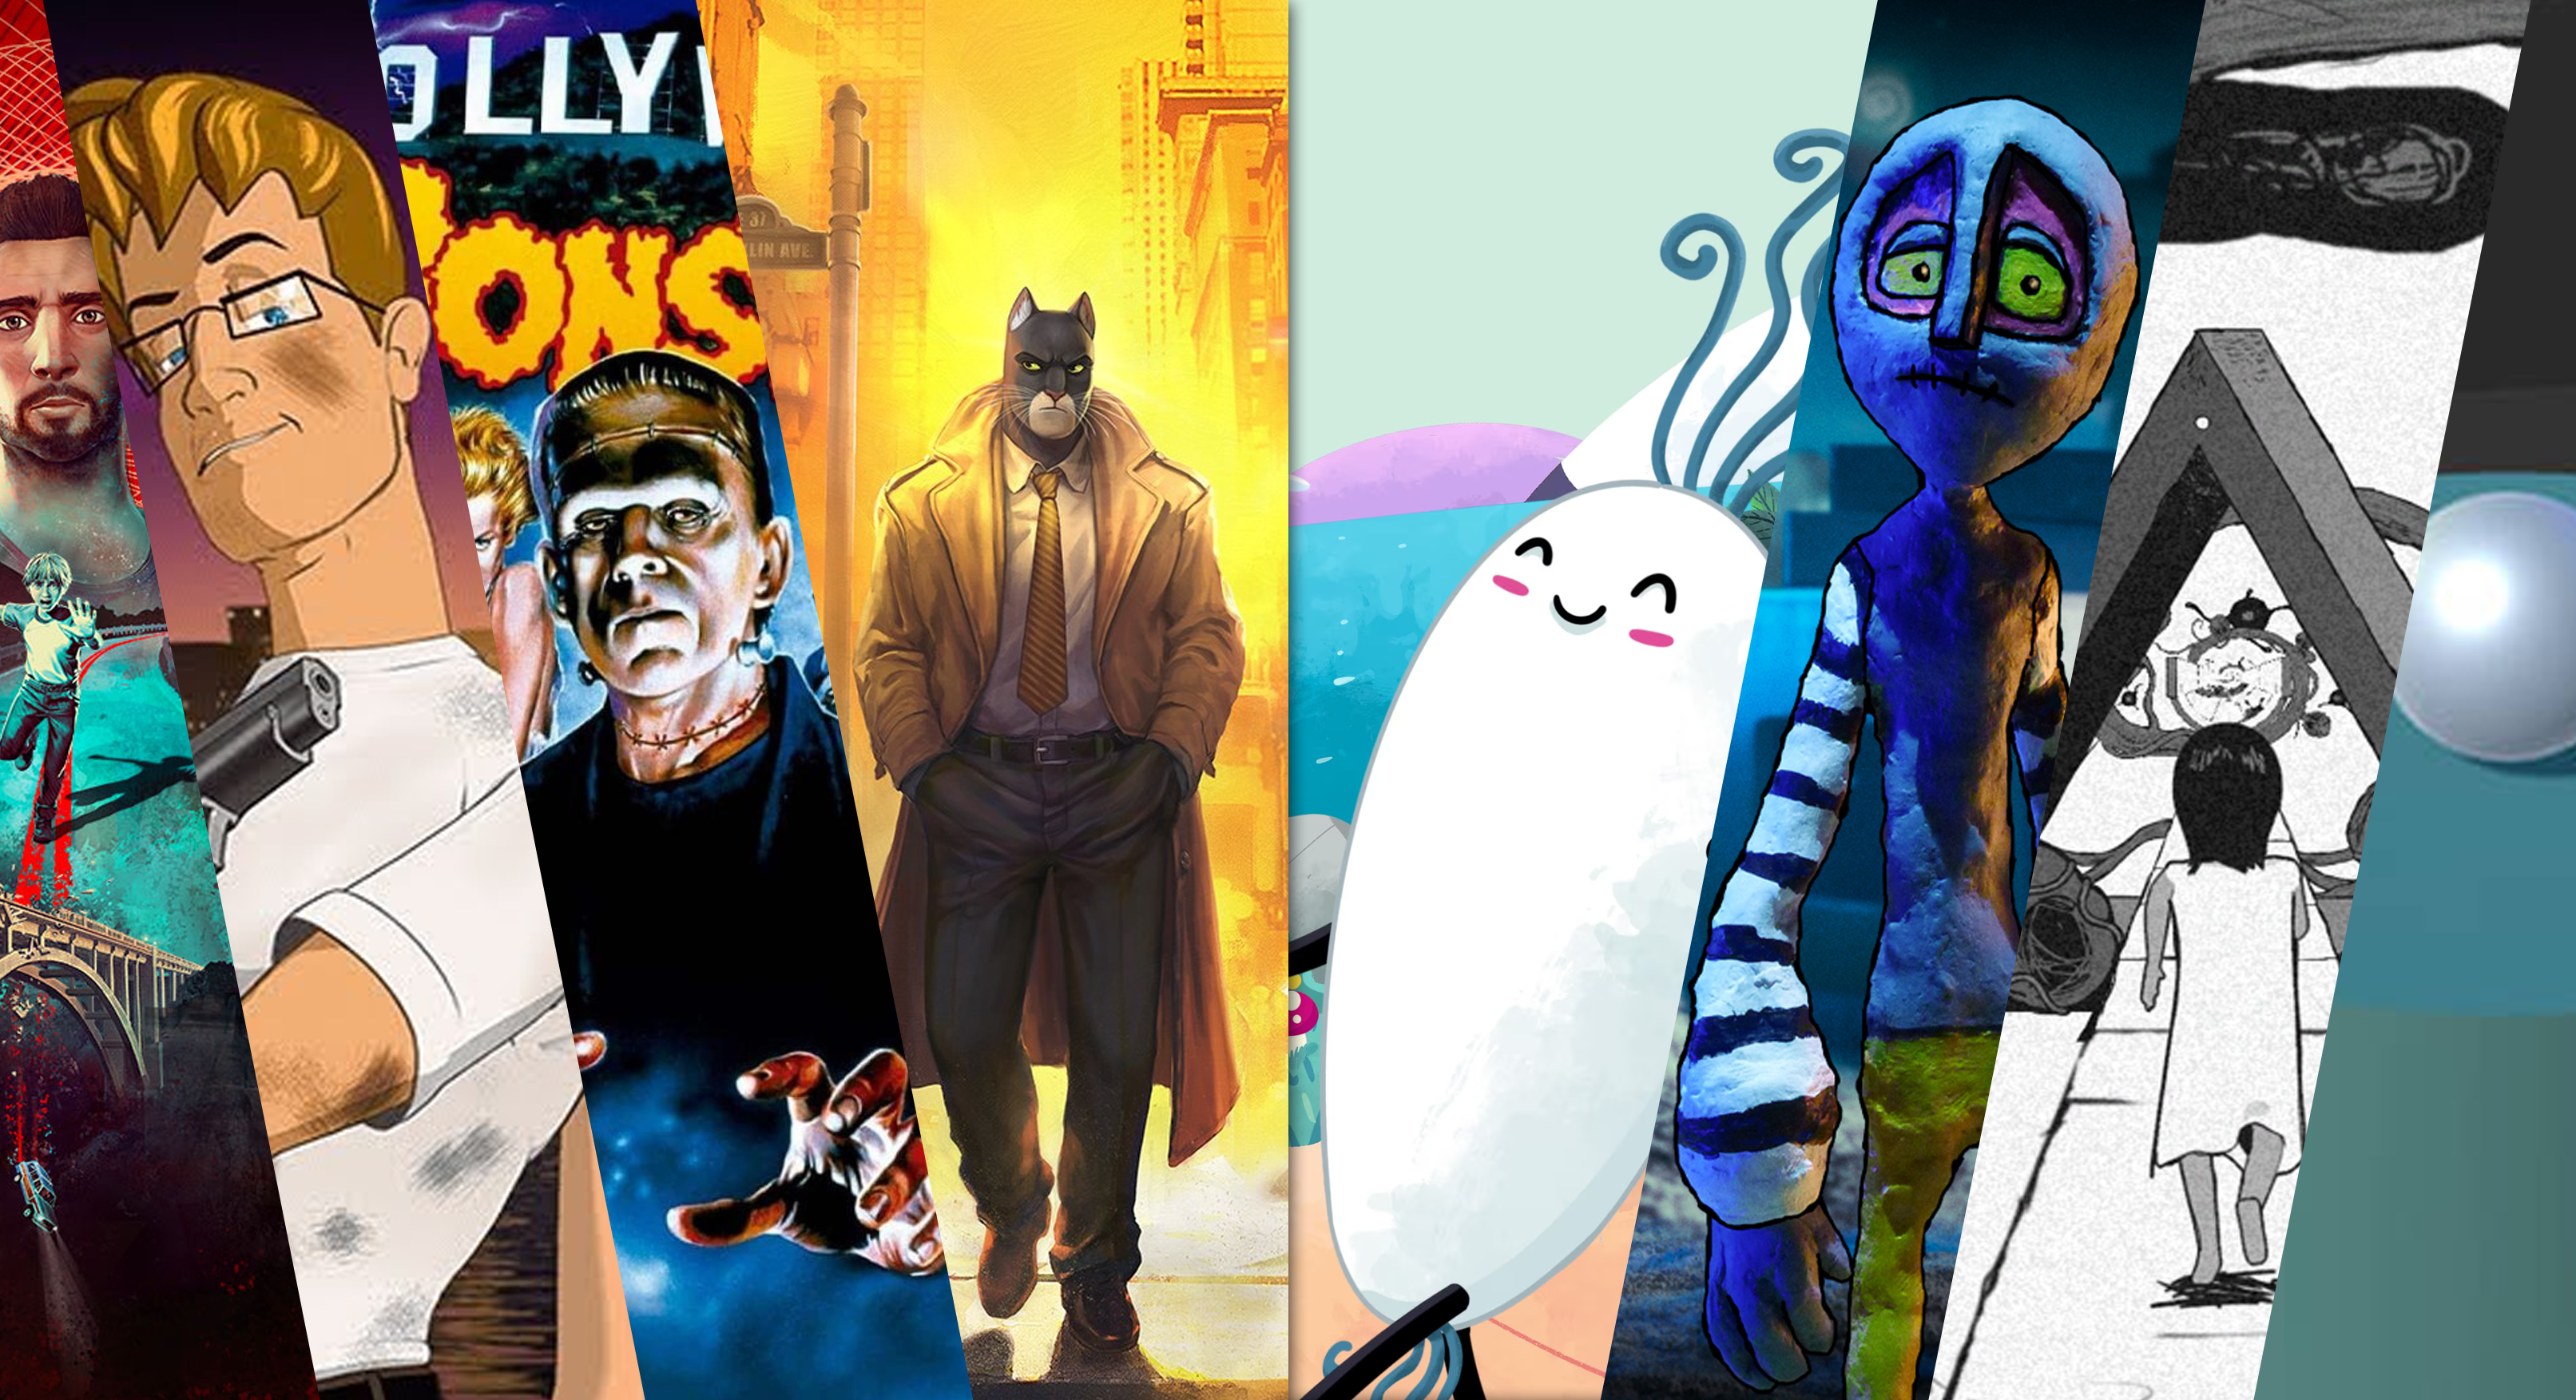 Almost 30 years developing video games: Pendulo Studios and Devilish Games